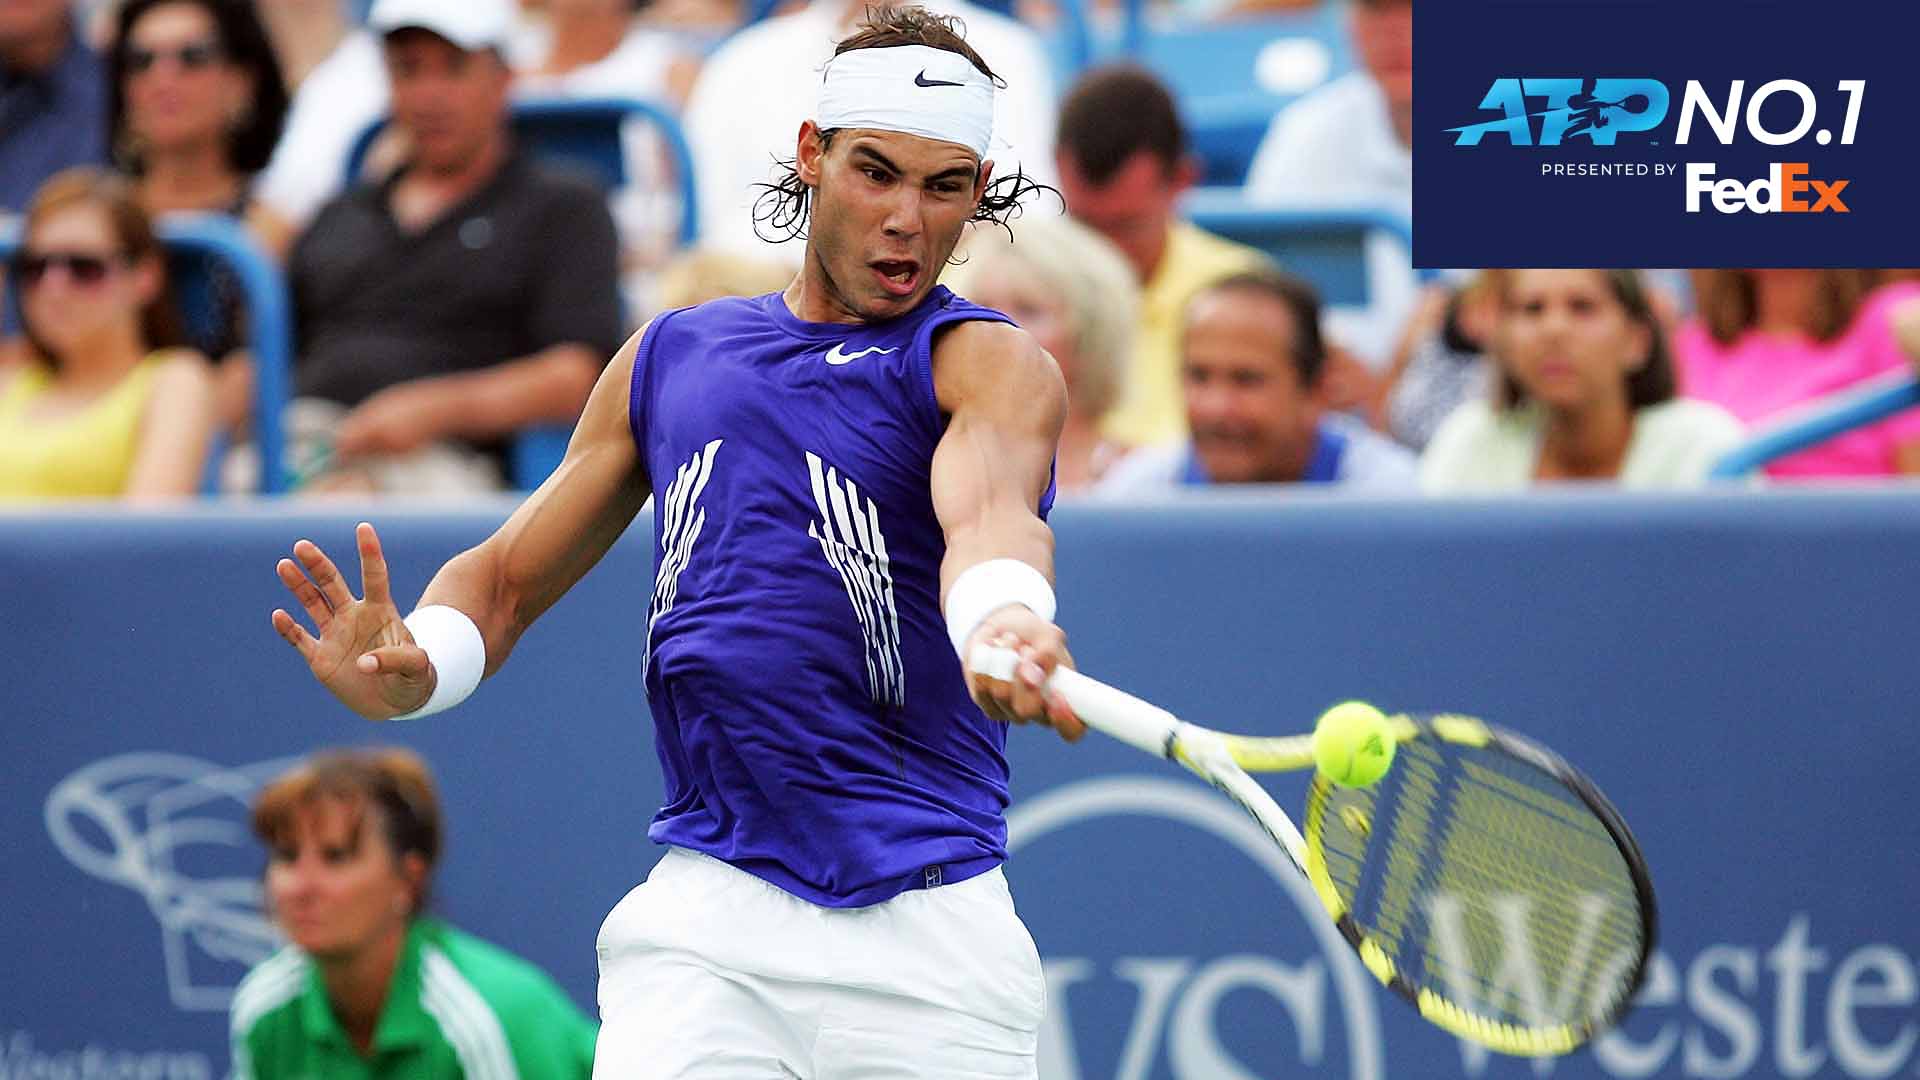 Rafael Nadal beat Nicolas Lapentti in the 2008 Western & Southern Open quarter-finals to guarantee his rise to No. 1 in the FedEx ATP Rankings.